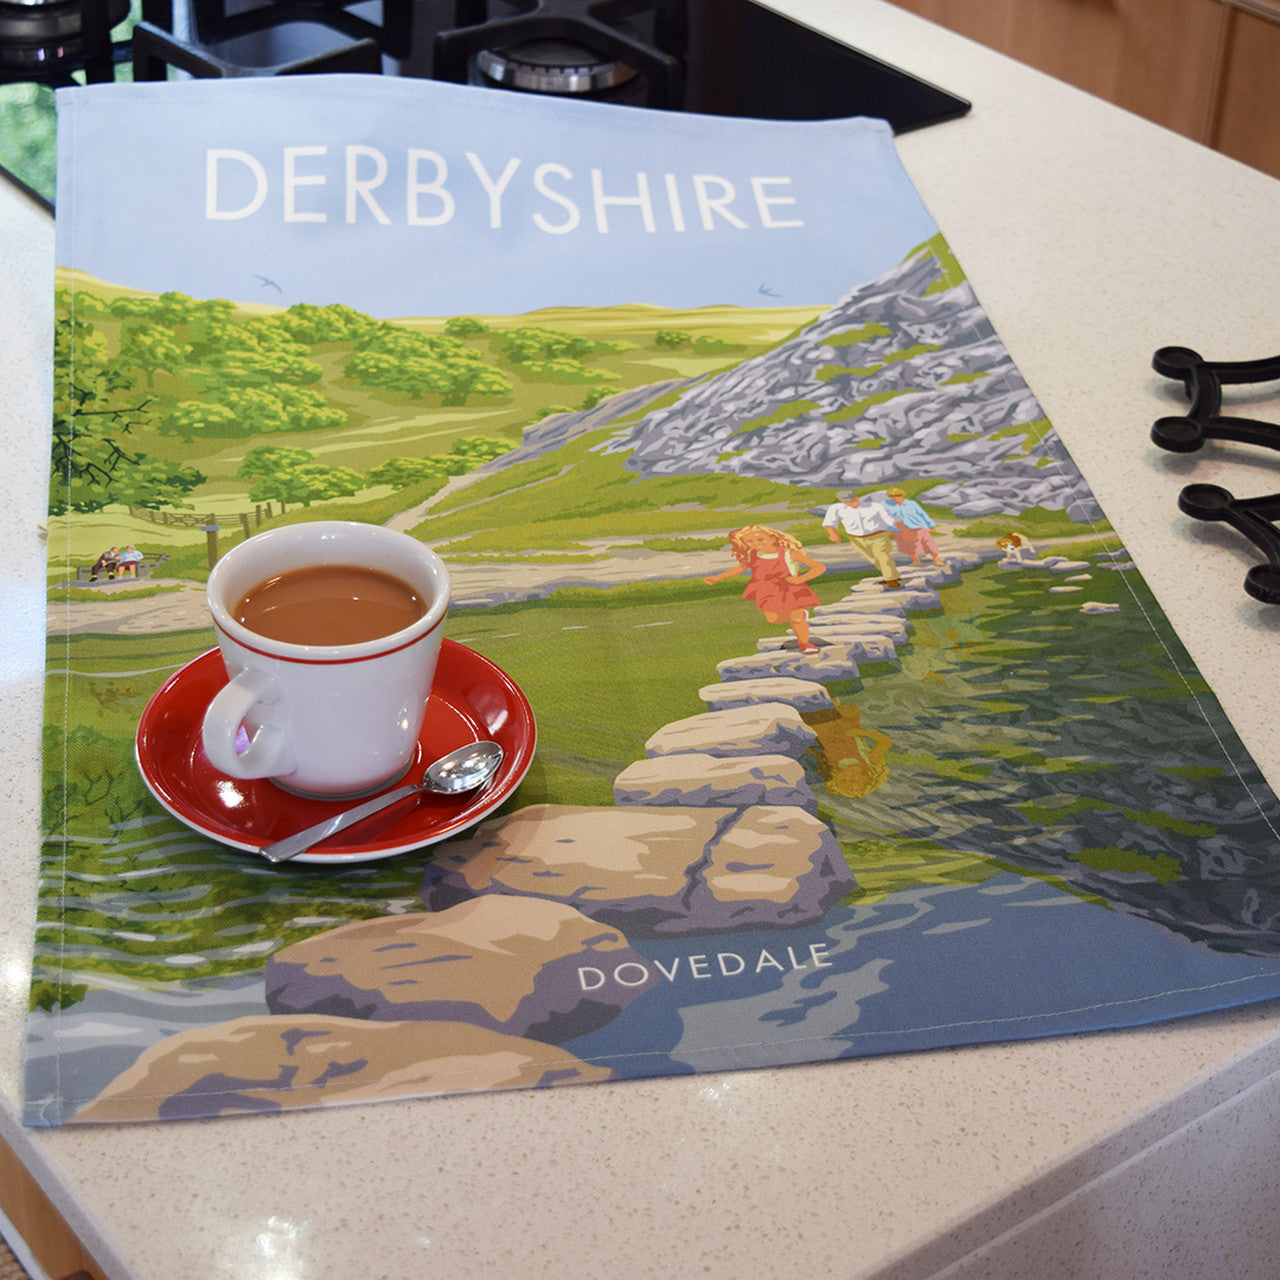 Derbyshire - Dovedale Tea Towel by Town Towels